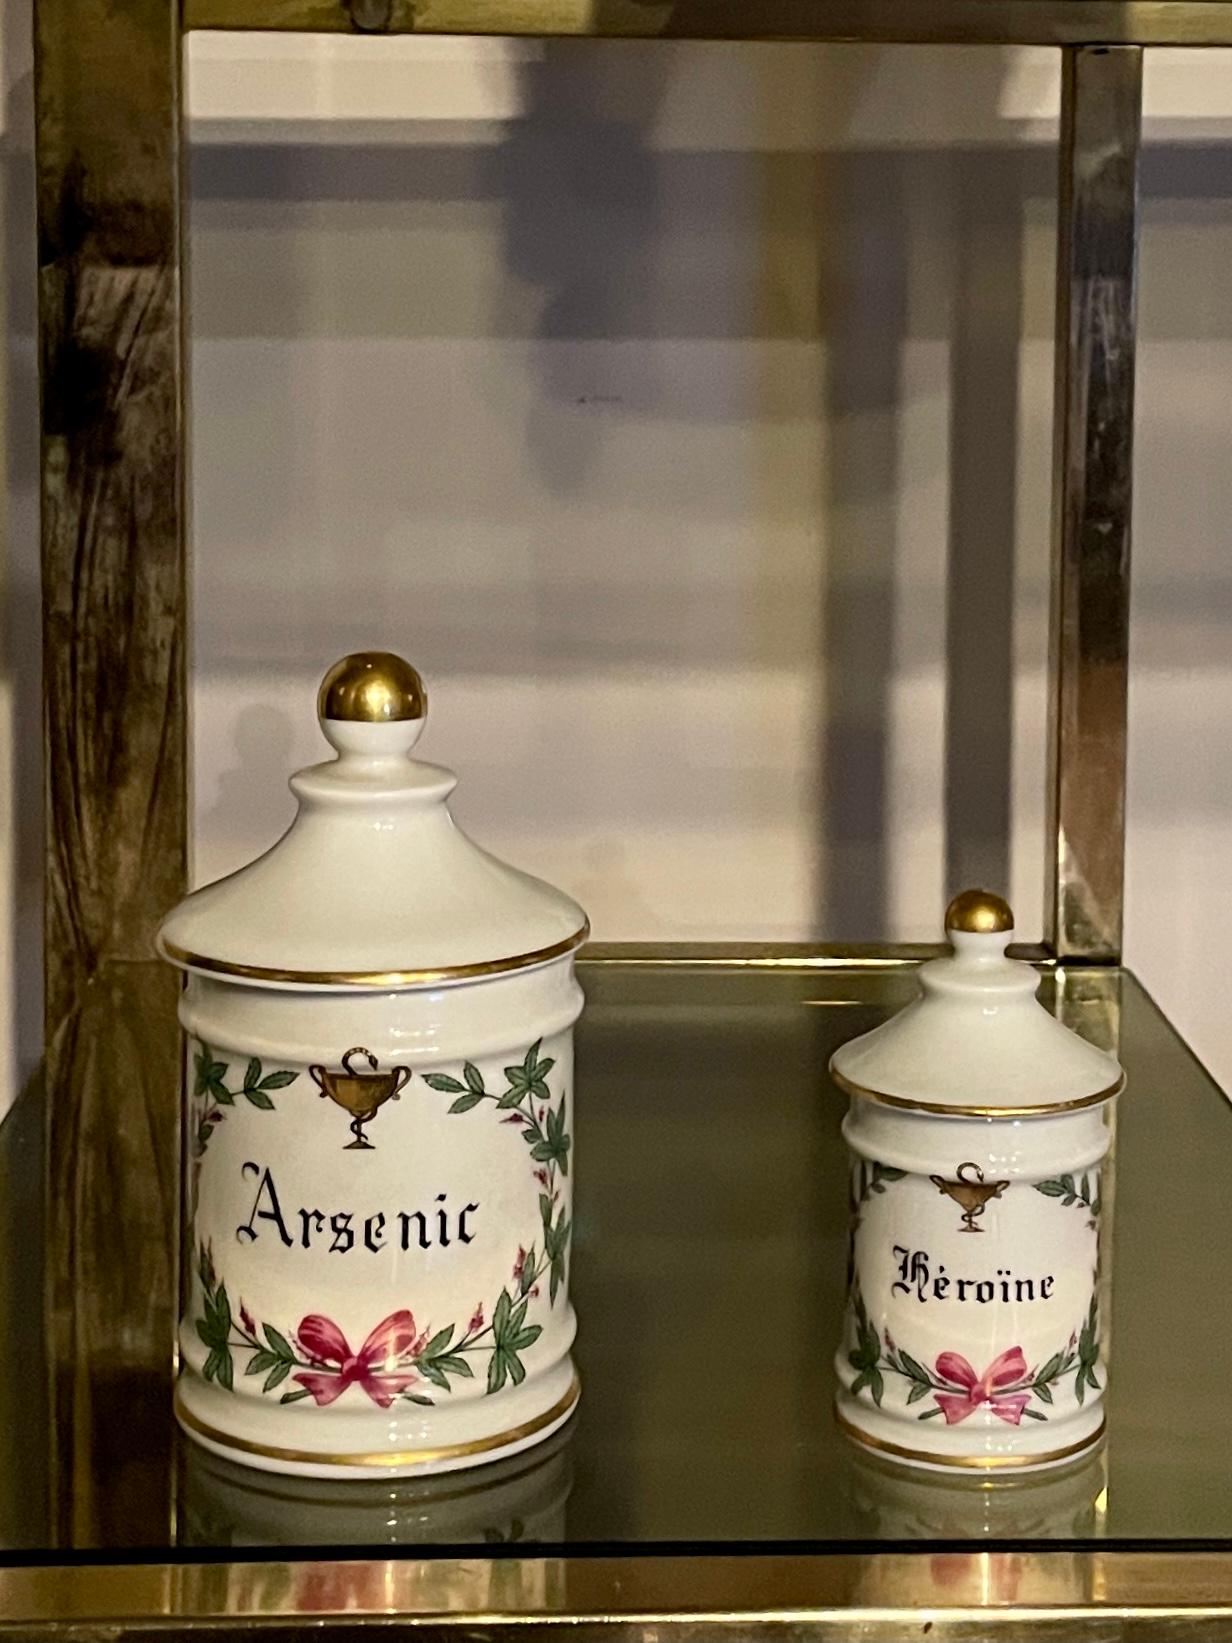 19th Century Set of 2 French Apothecary Jar Arsenic and Heroin 19th Porcelain Limoges Drug